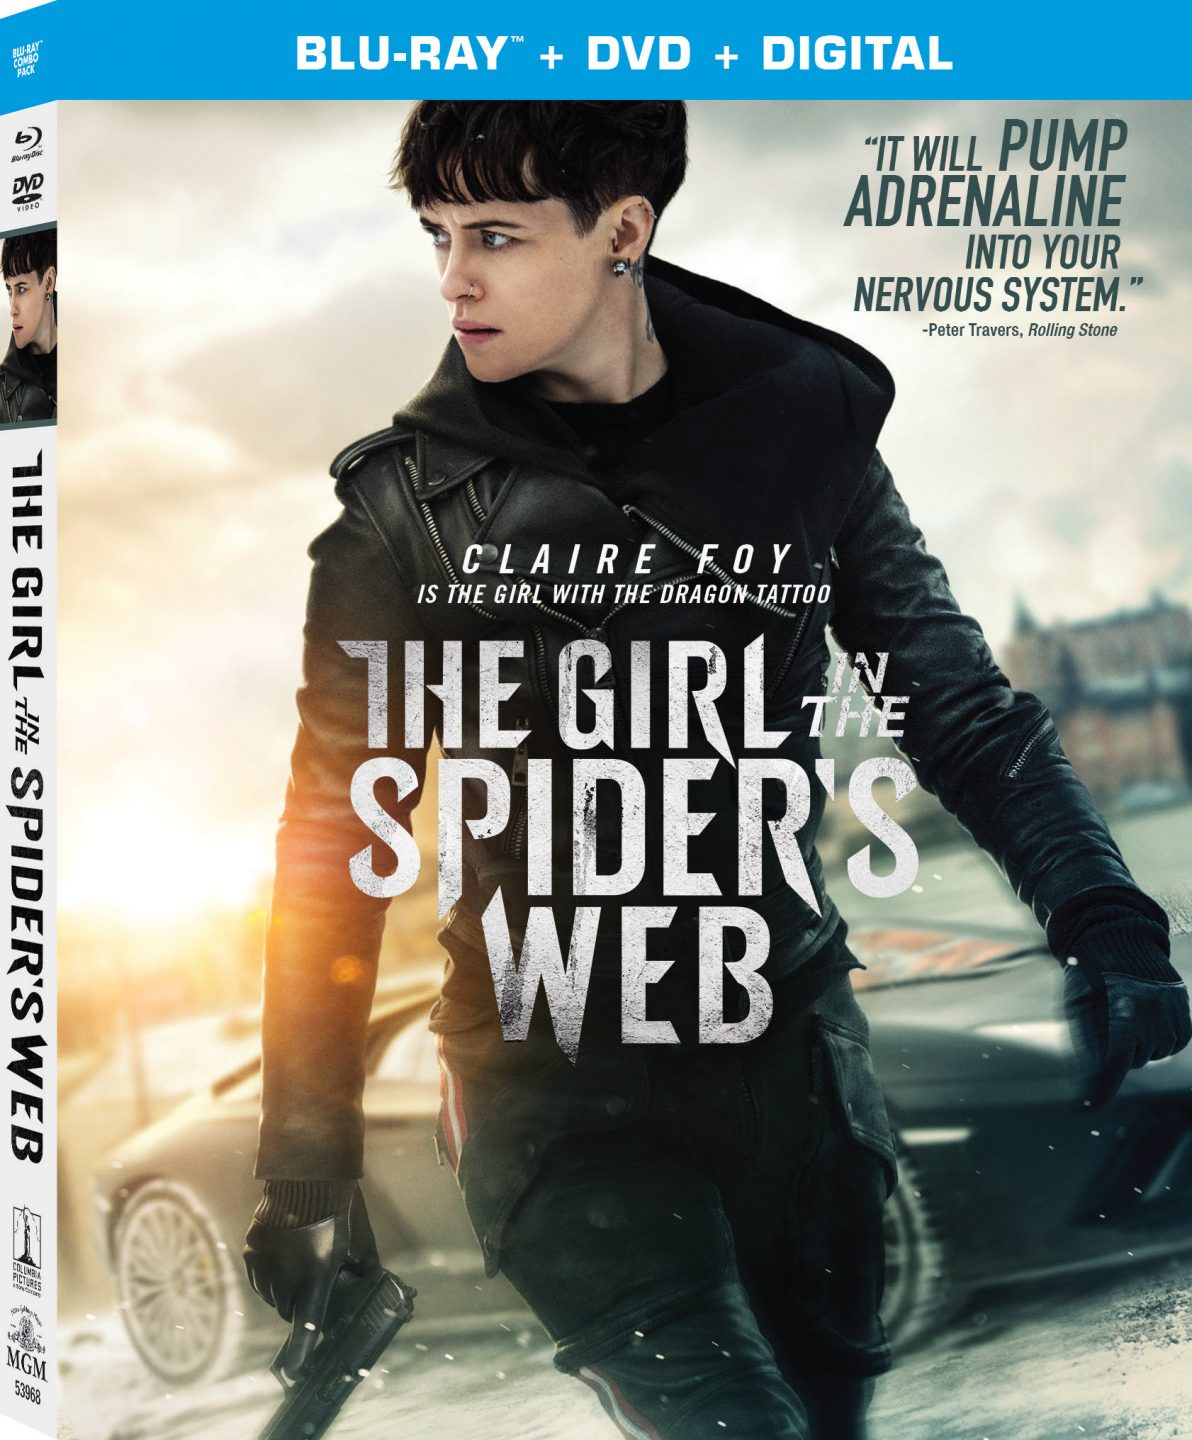 The Girl In The Spider's Web Blu-Ray Combo Pack cover (Sony Pictures Home Entertainment)